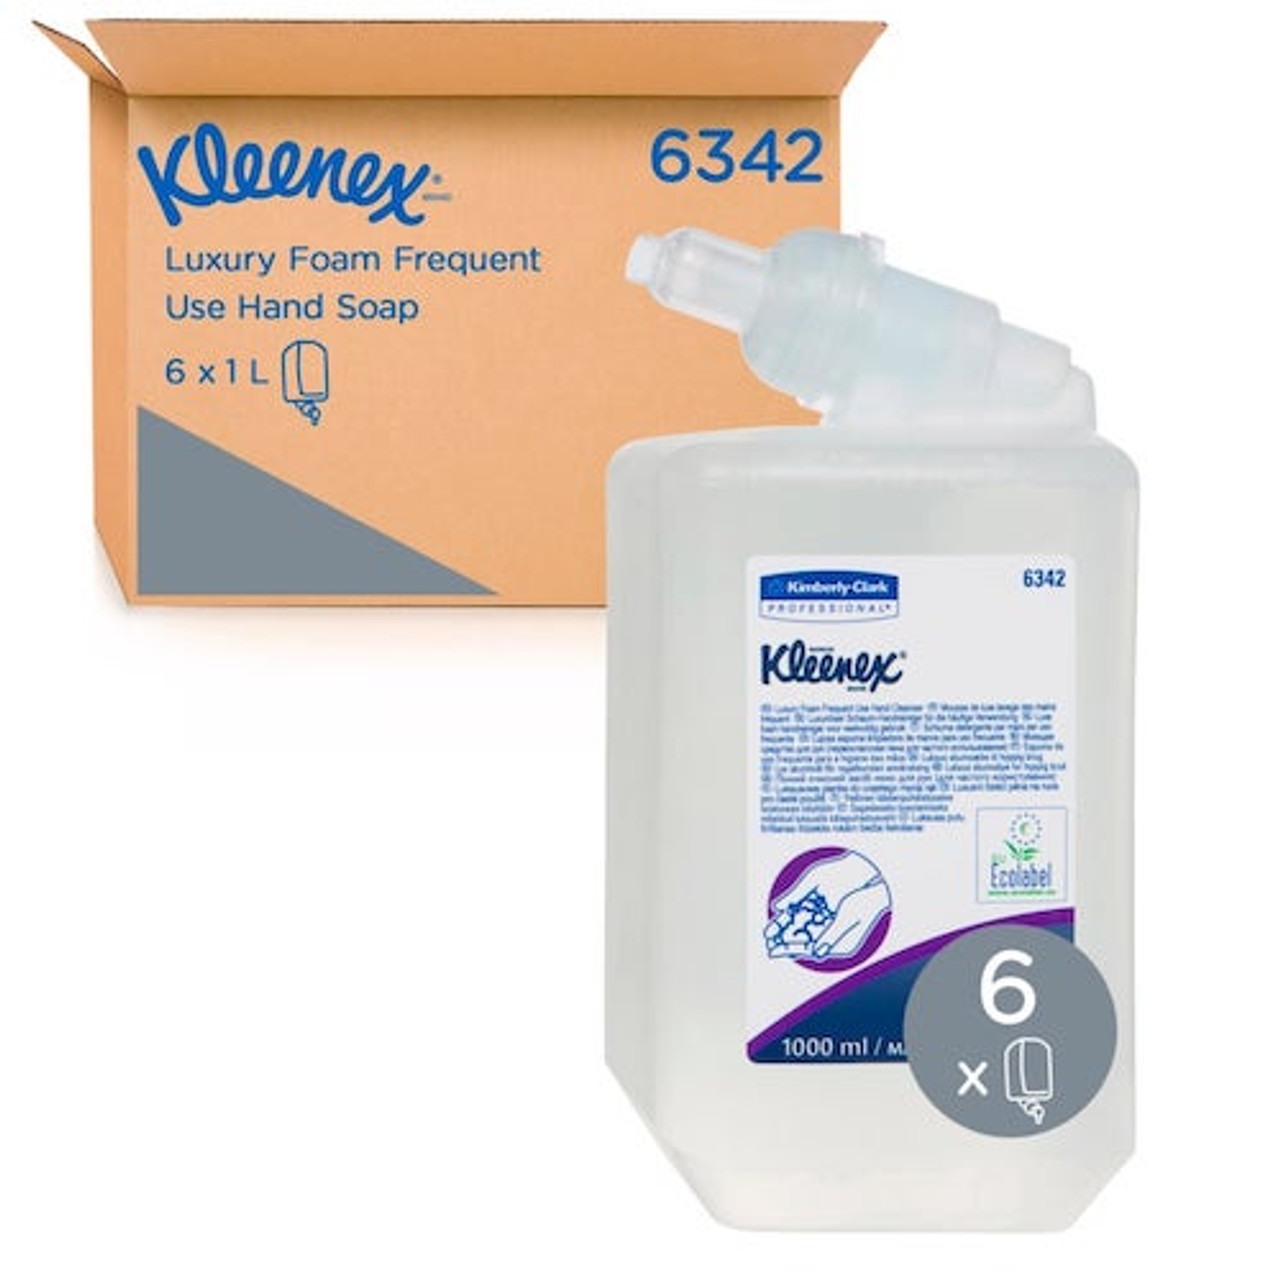 Kleenex Luxury Foam Frequent Use Hand Soap Cleanser 6 x 1 Litre (6342)
